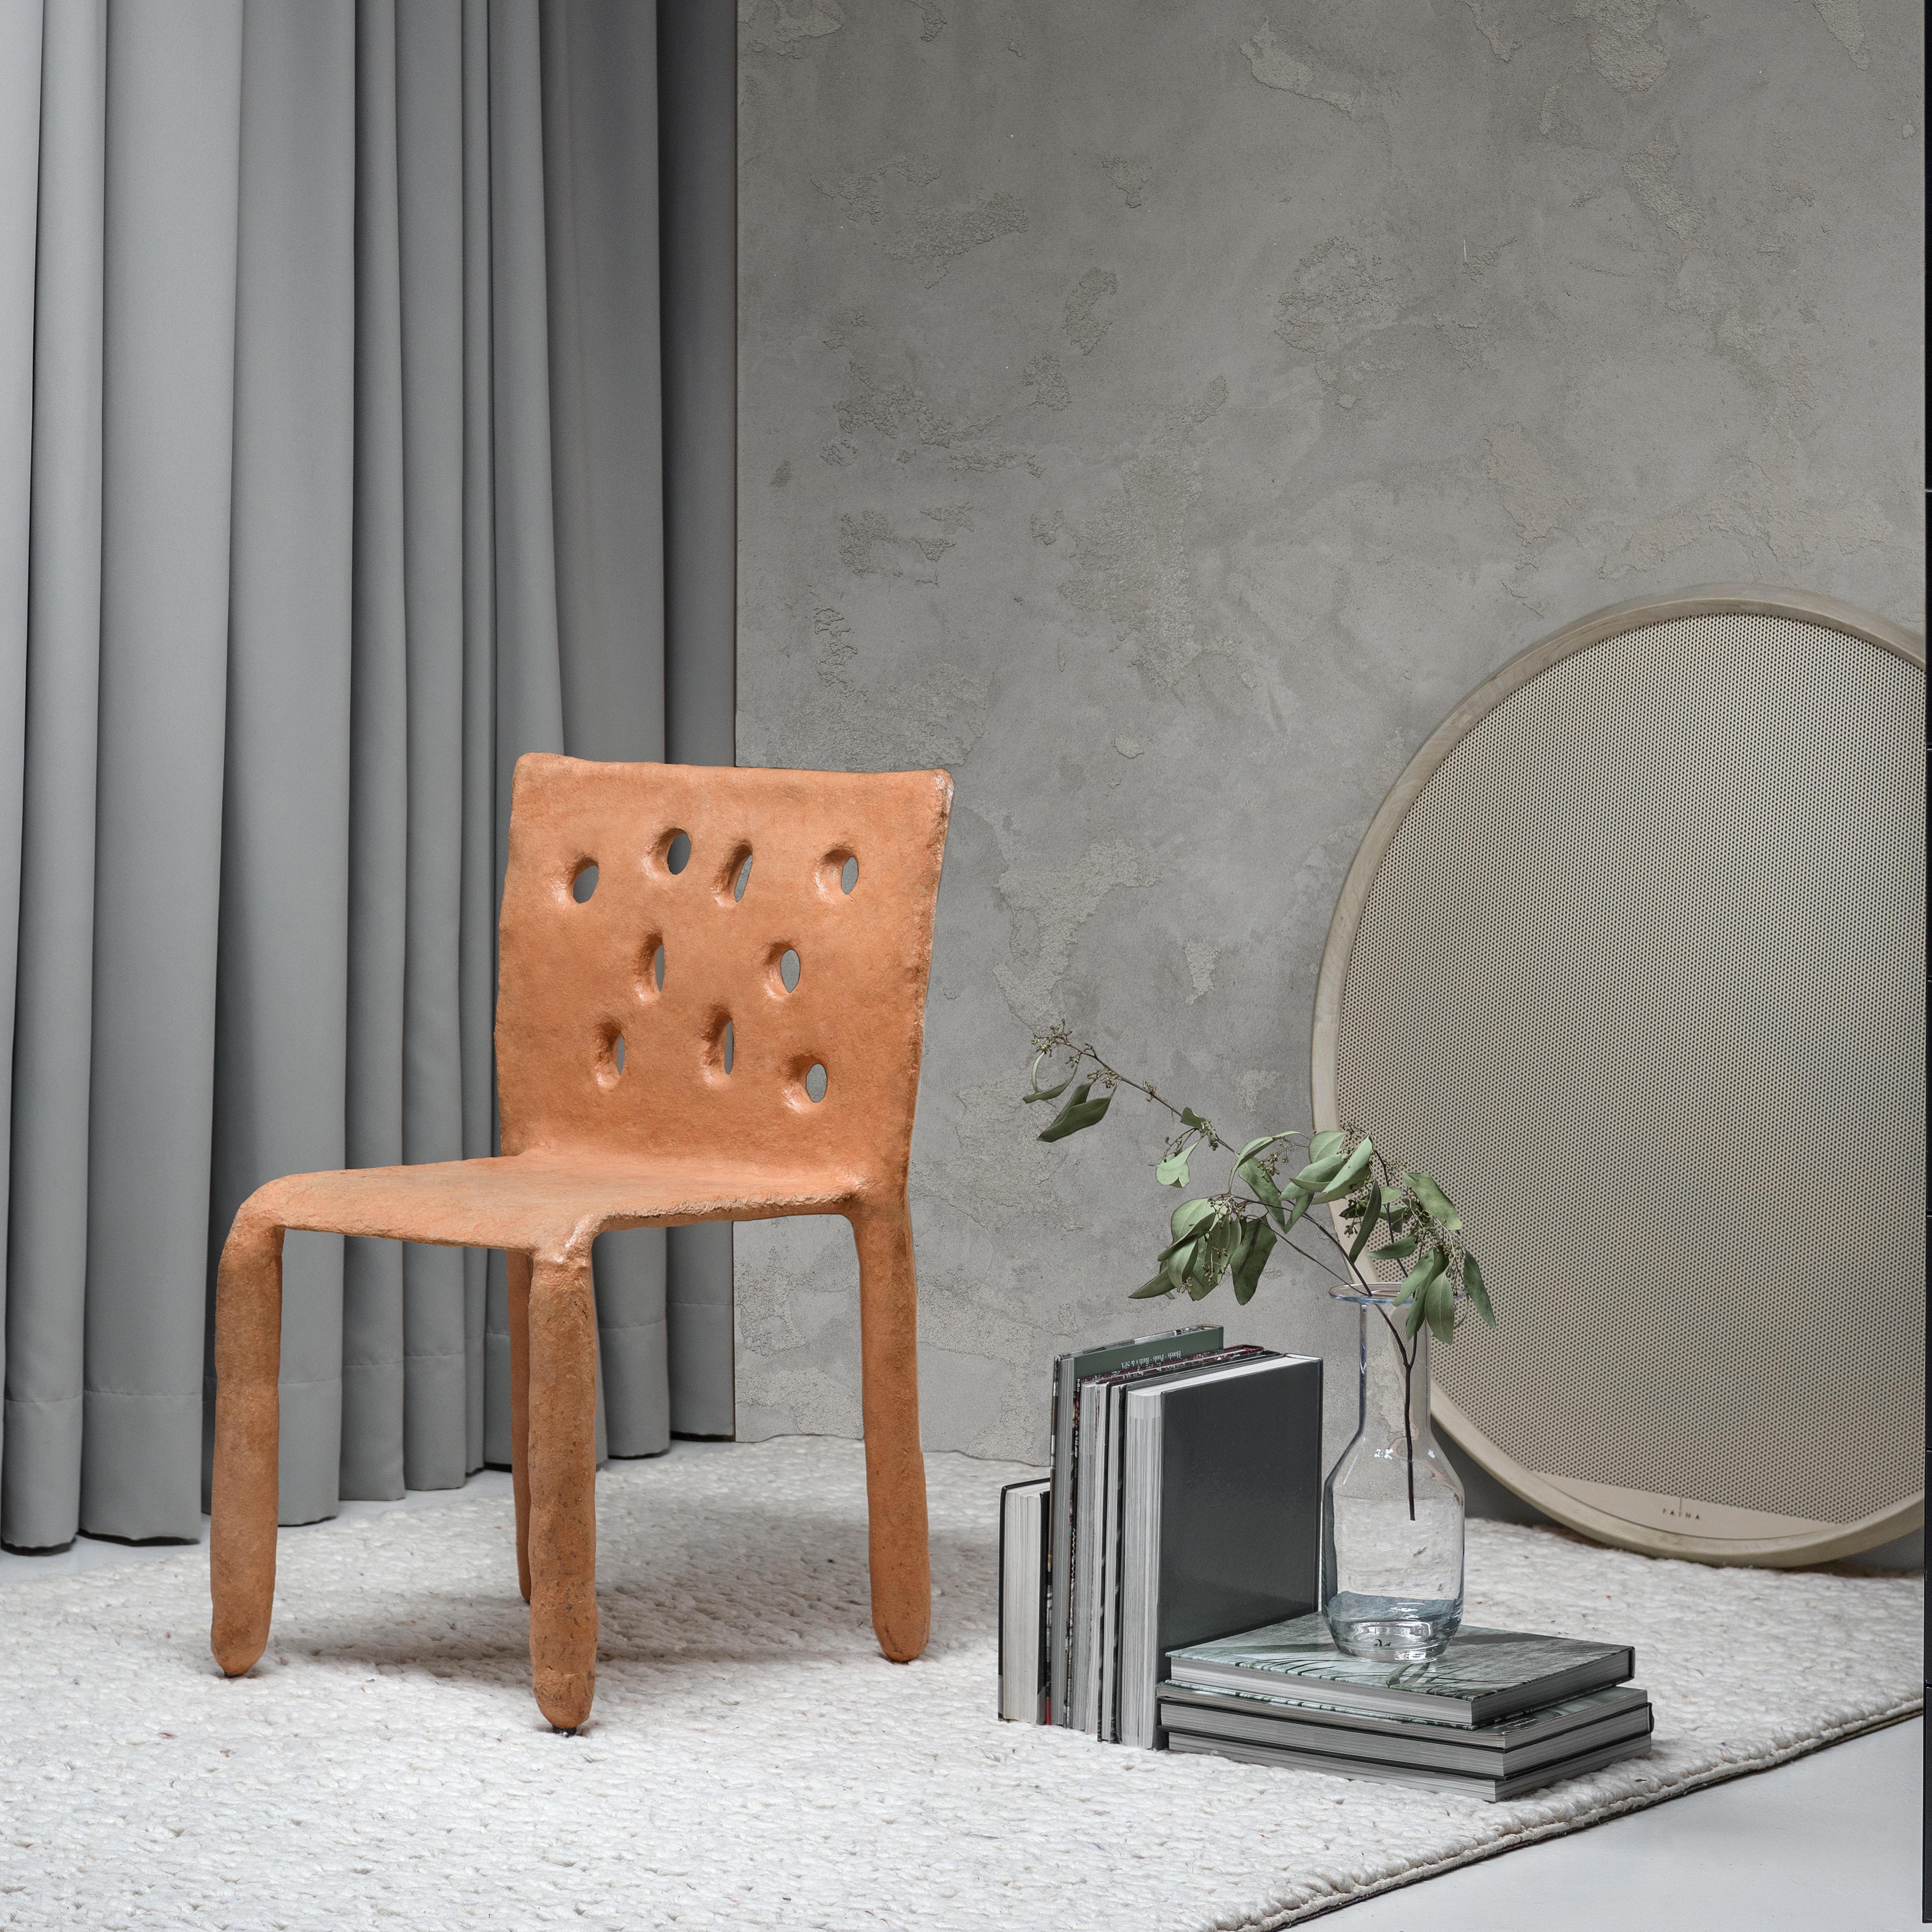 Sculpted Outdoor contemporary chair by FAINA
Design: Victoriya Yakusha
Material: steel, flax rubber, biopolymer, cellulose
Dimensions: Height 82 x width 54 x legs depth 45 cm
Weight: 15 kilos.

Indoor finish available, please contact